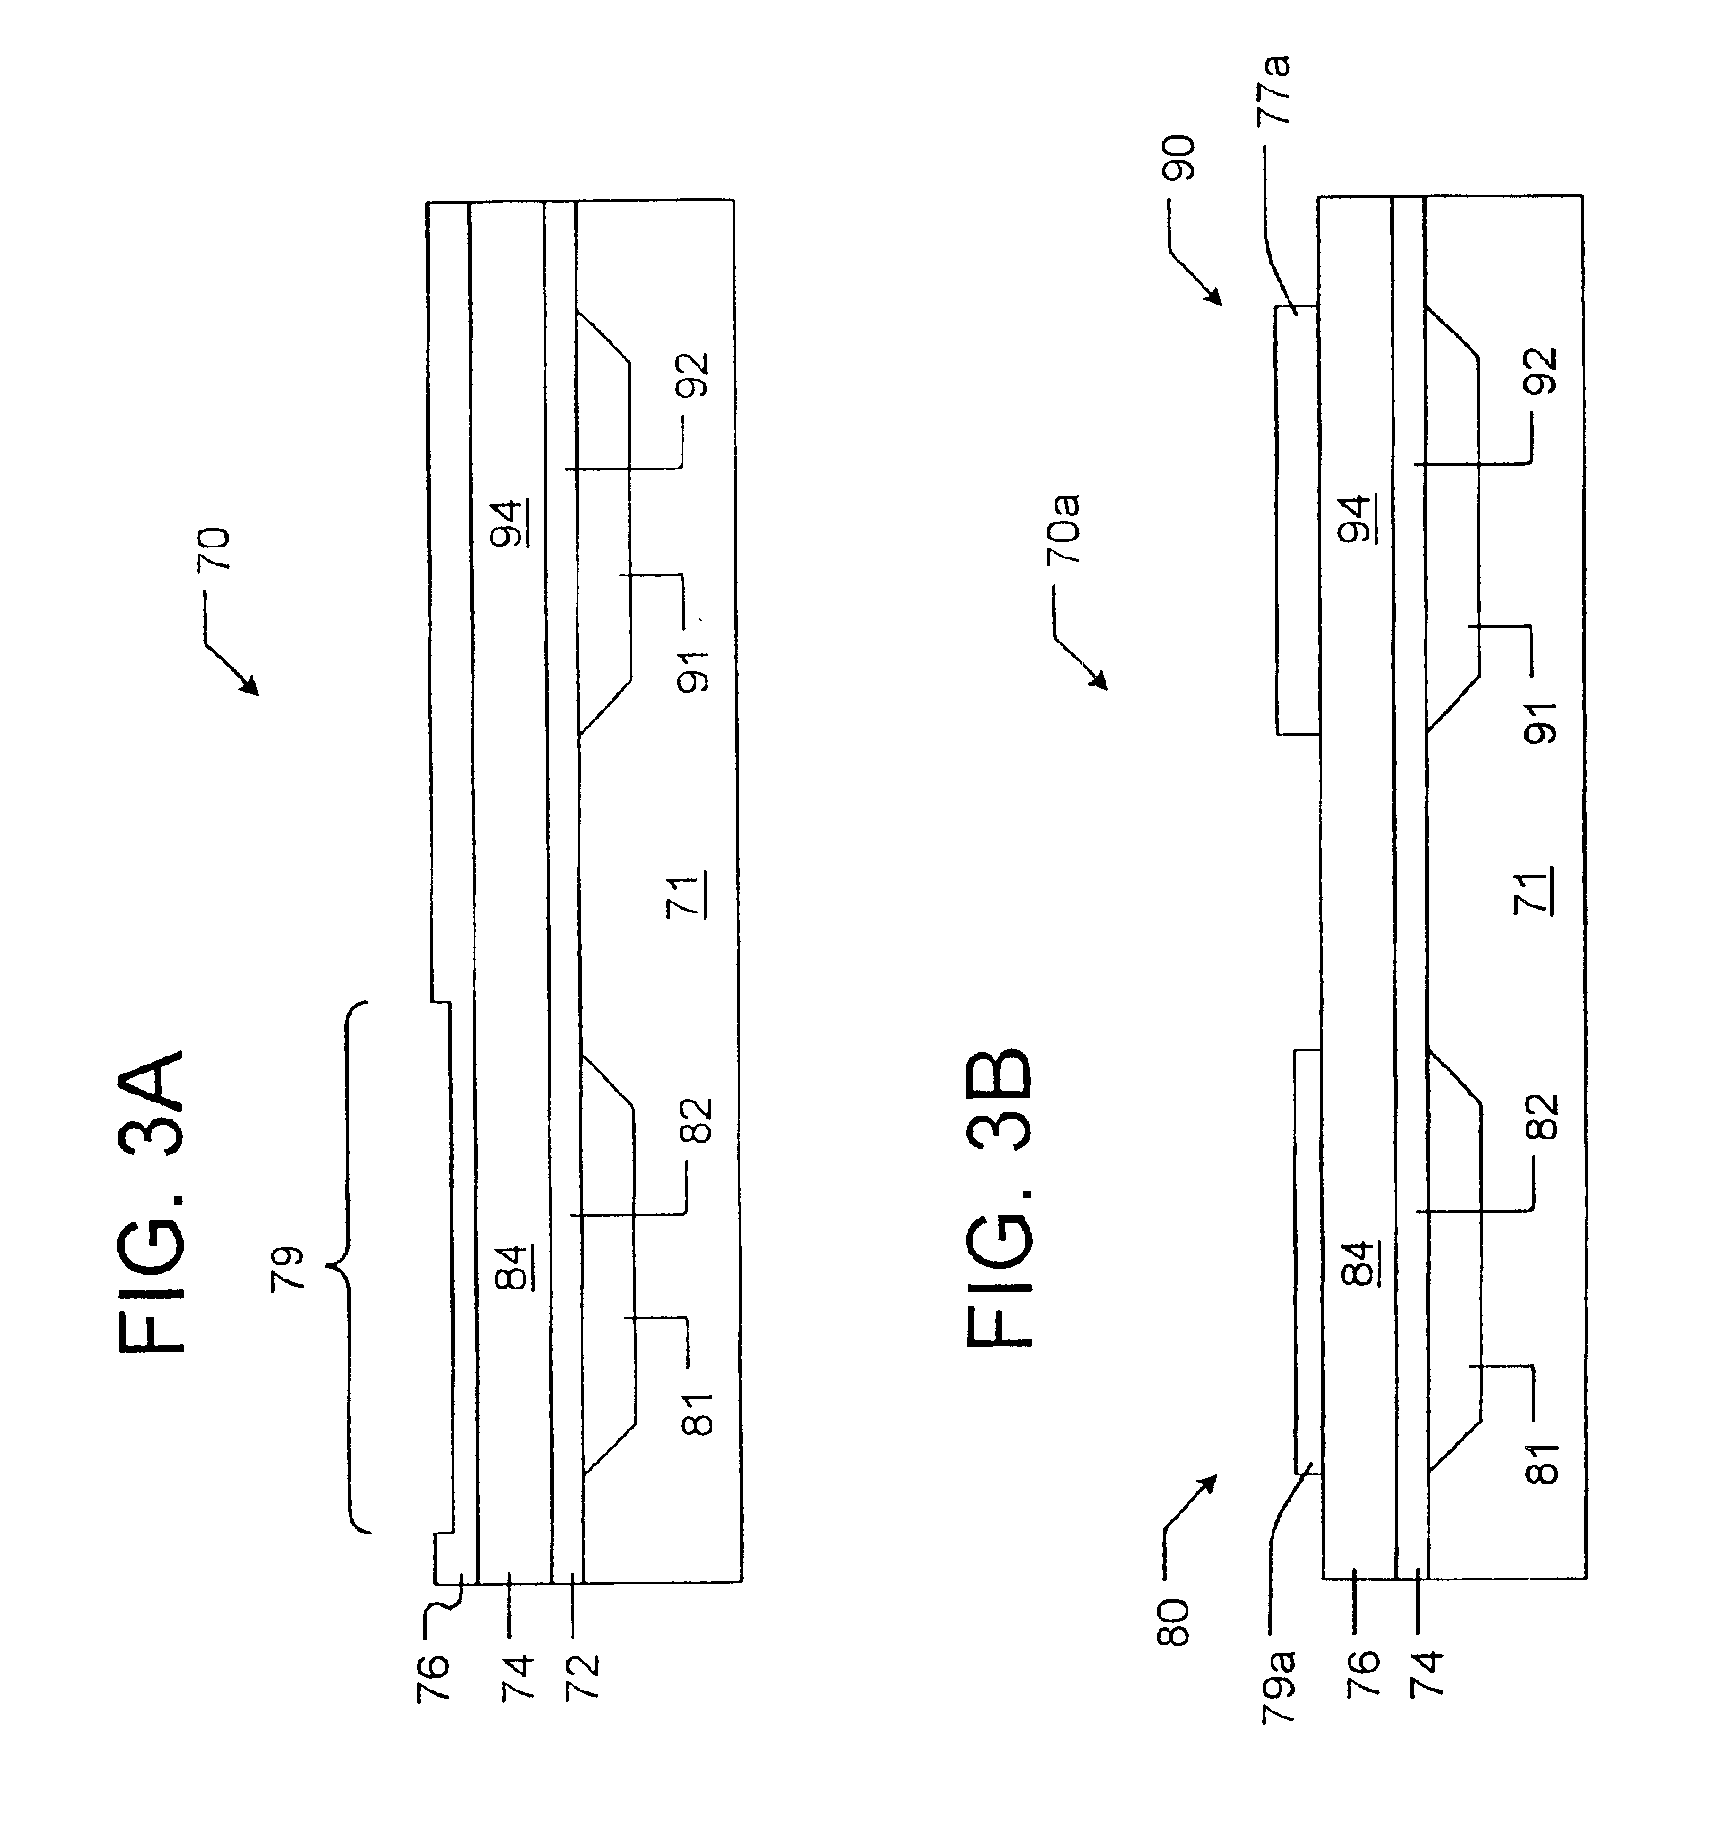 Method for producing thin film bulk acoustic resonators (FBARs) with different frequencies on the same substrate by subtracting method and apparatus embodying the method